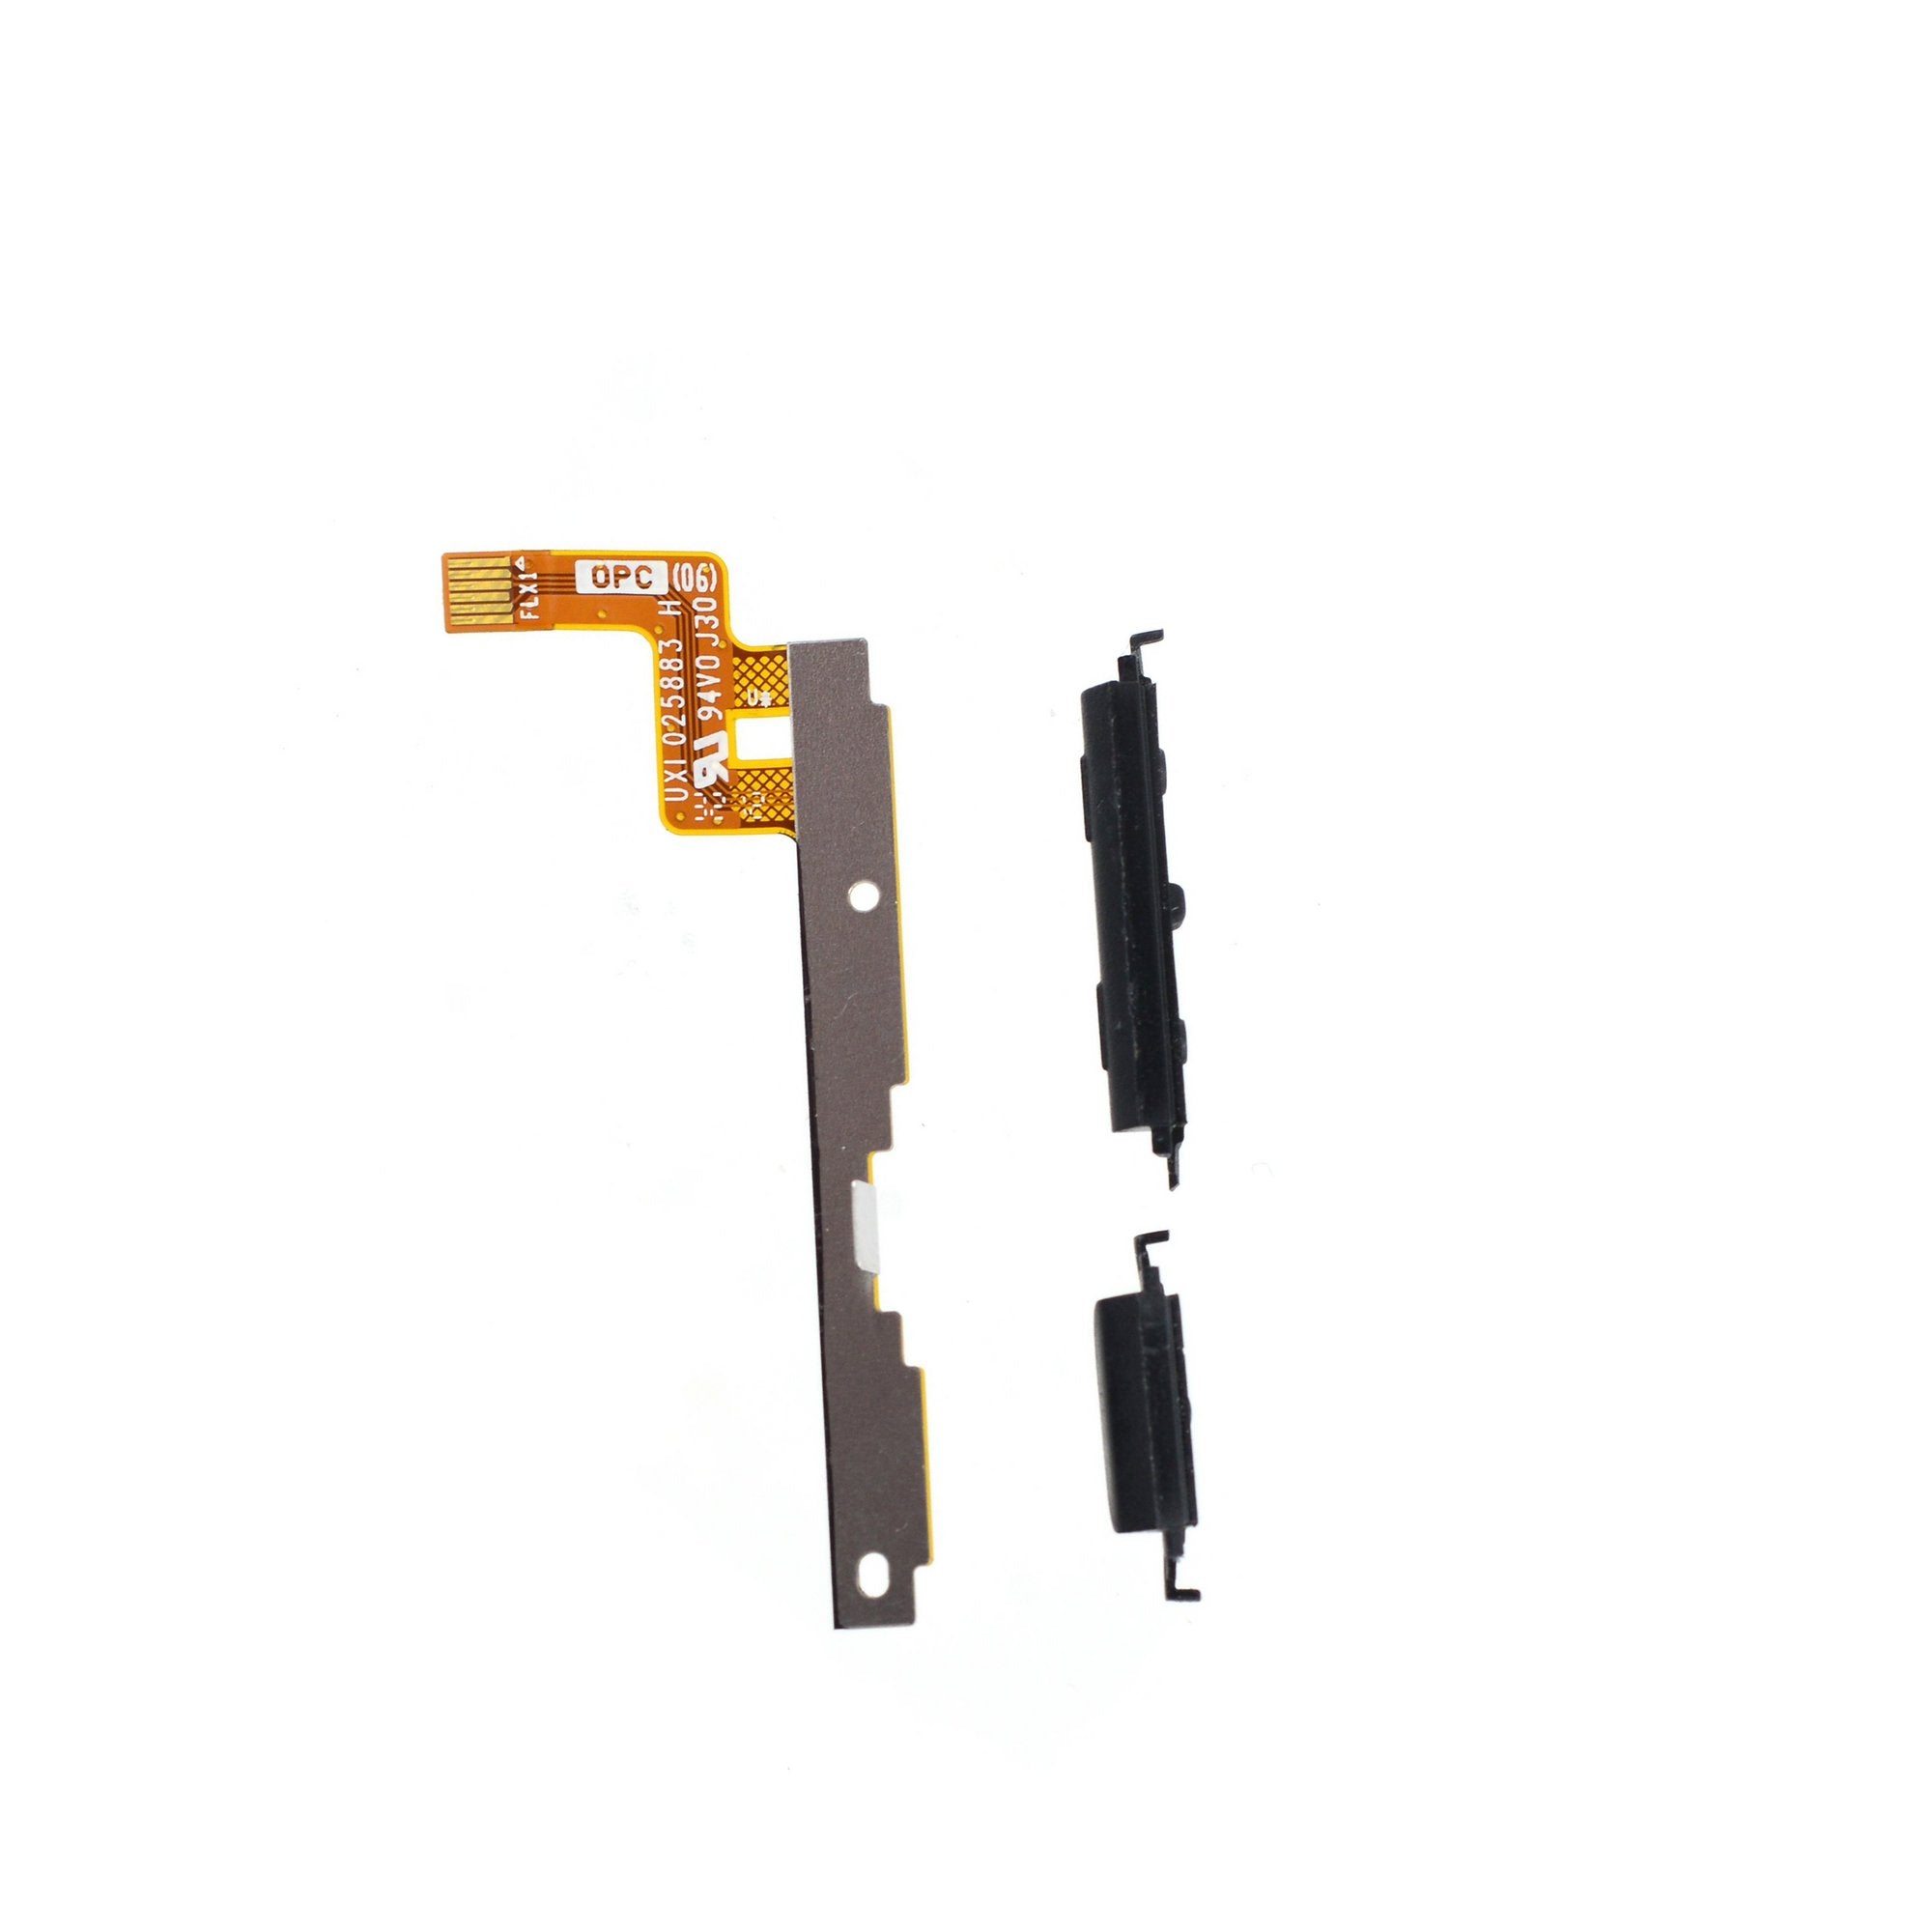 Kindle Fire HD 7" (2012, 1st Gen) Volume/Power Buttons and Ribbon Cable Used With Buttons